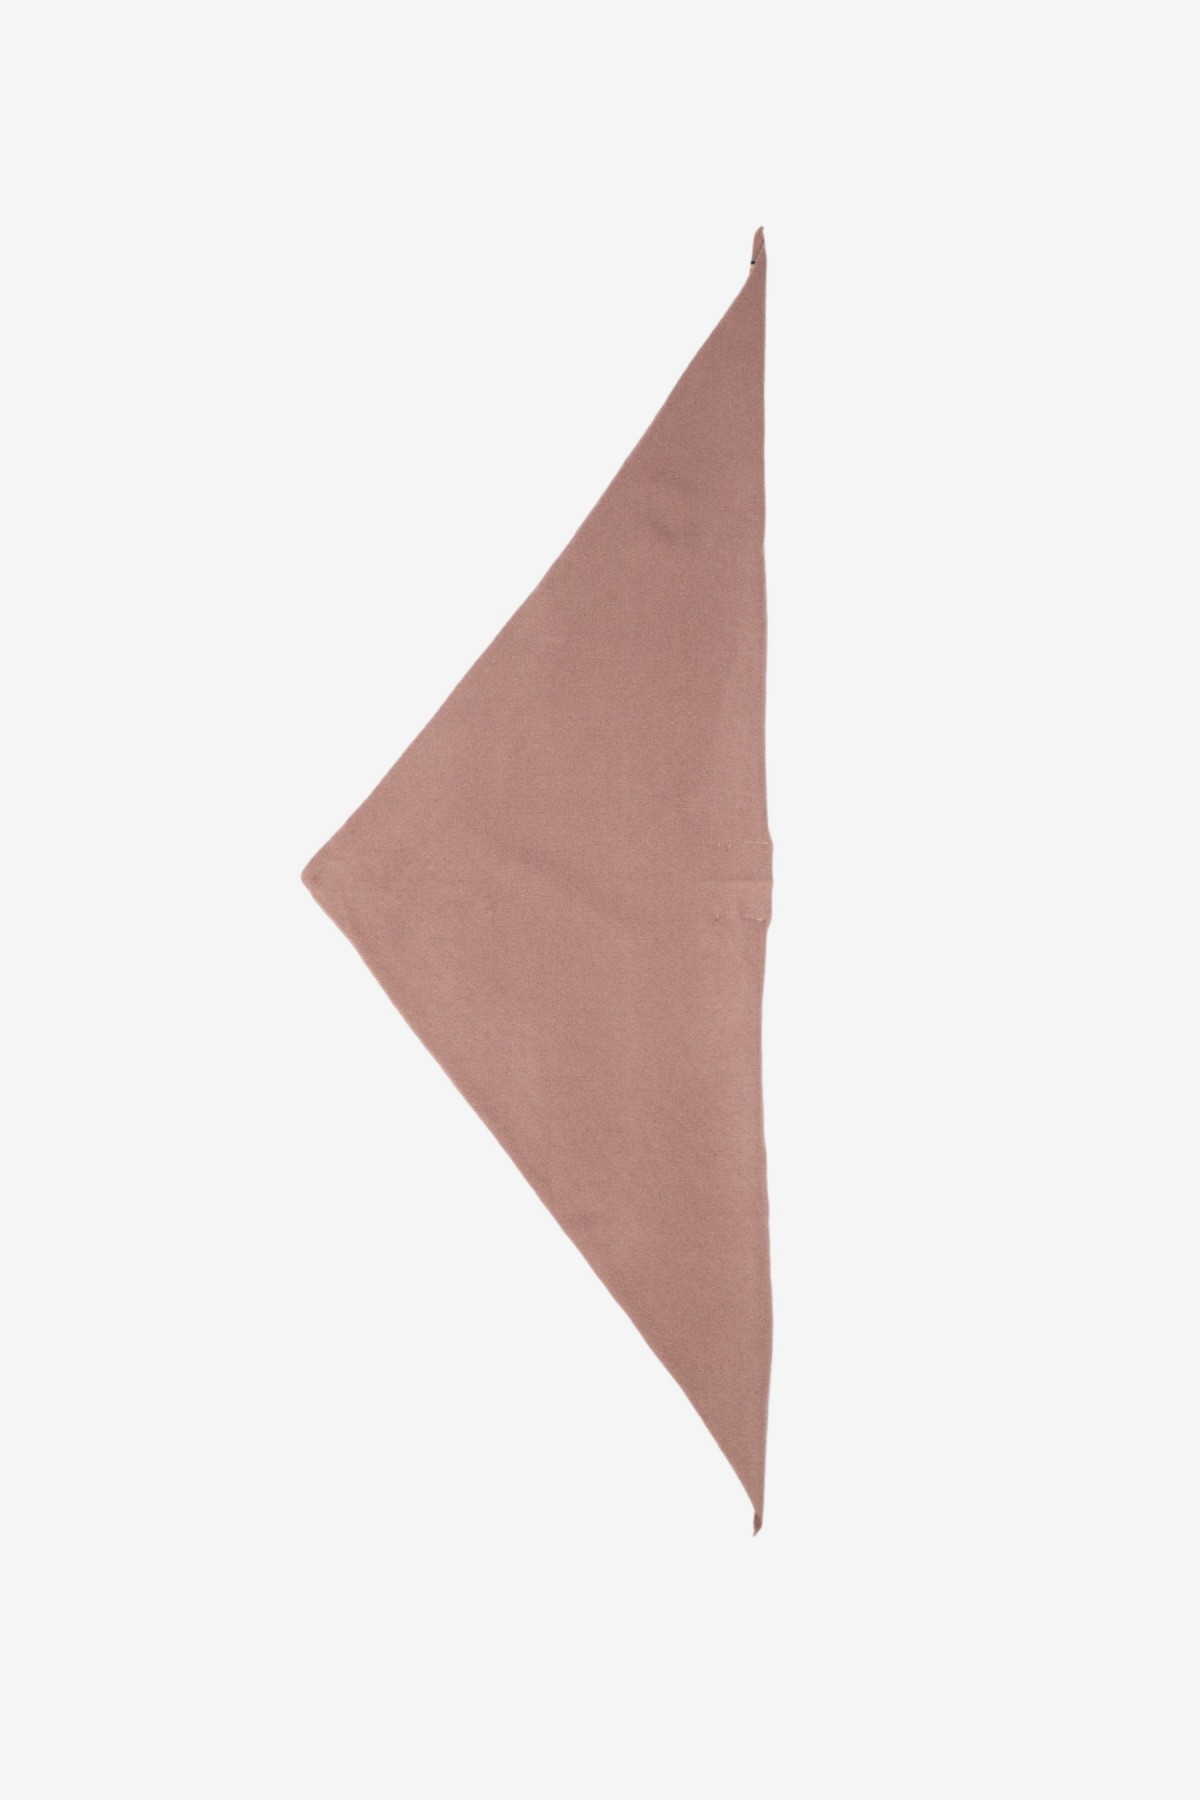 extreme cashmere n°35 bandana in Clay